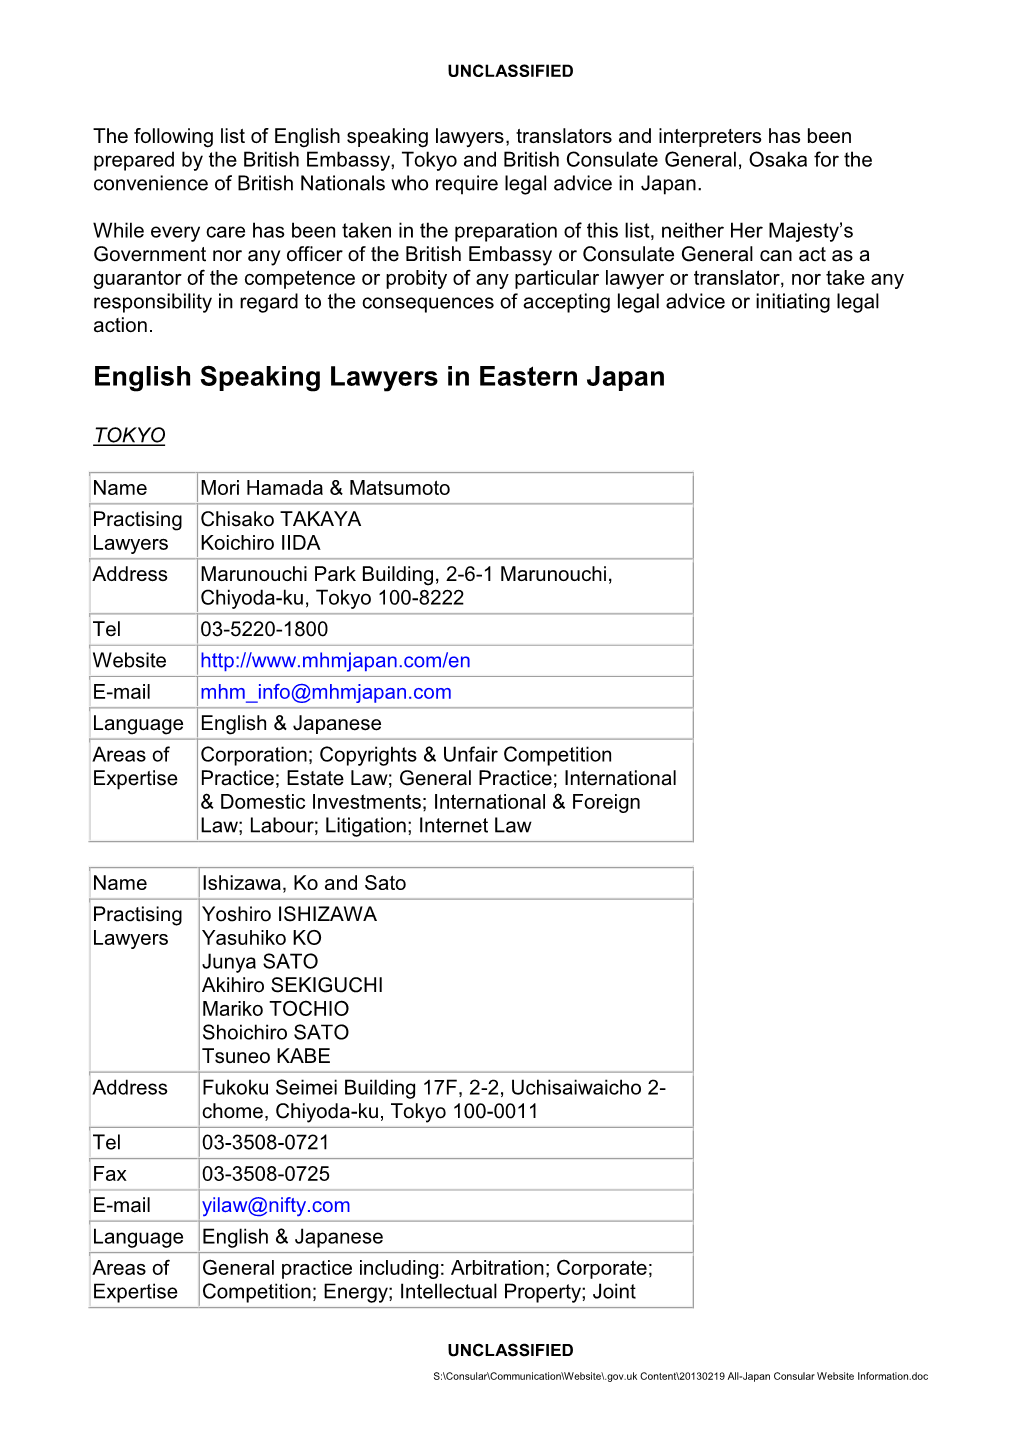 The Following List of English Speaking Lawyers, Translators and Interpreters Has Been